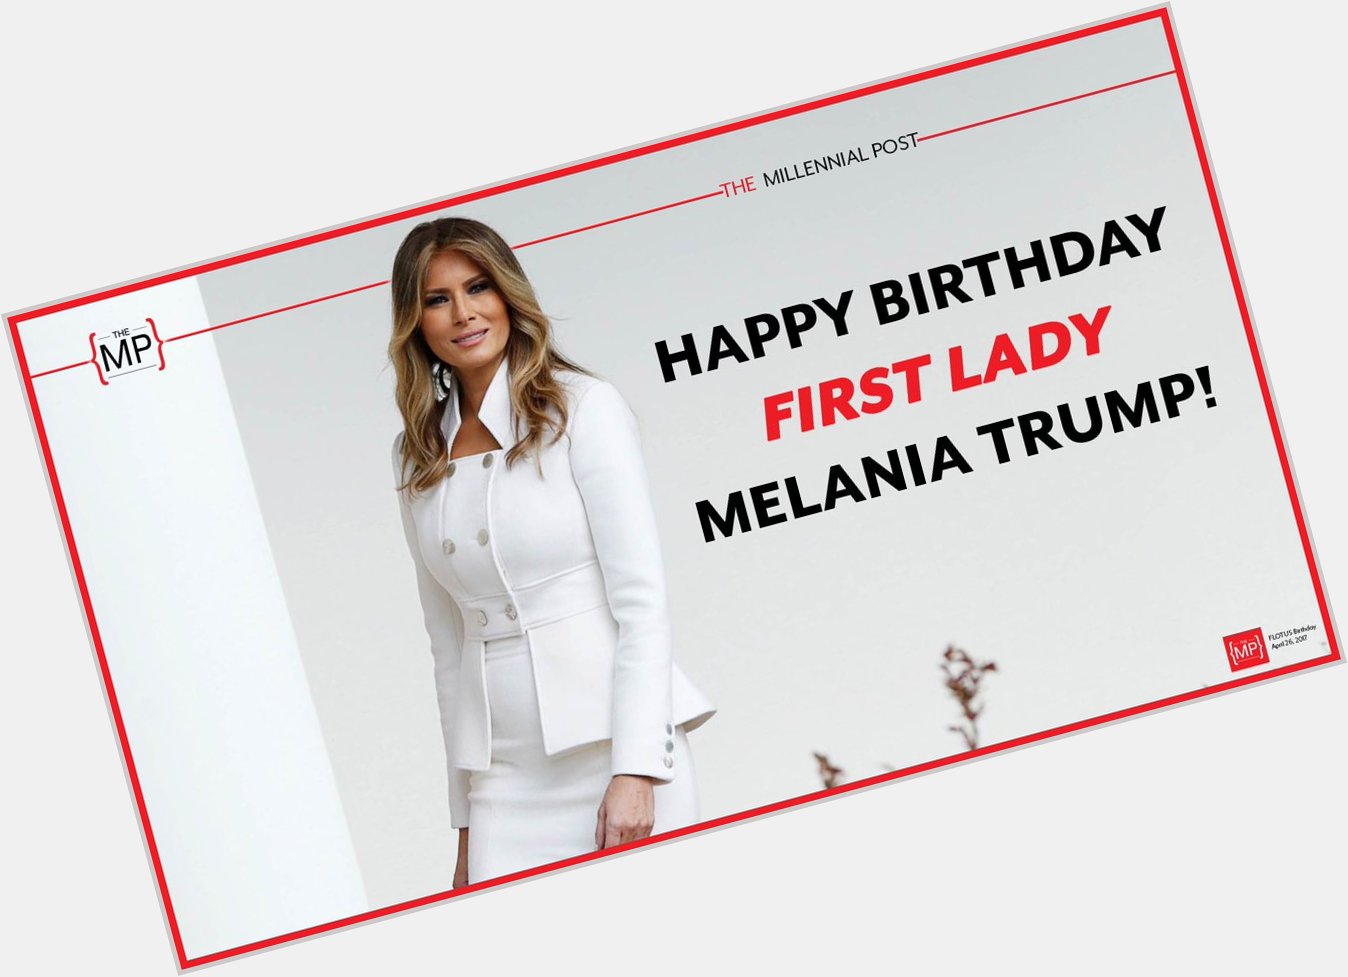 Happy Birthday to our First Lady, Melania Trump!  